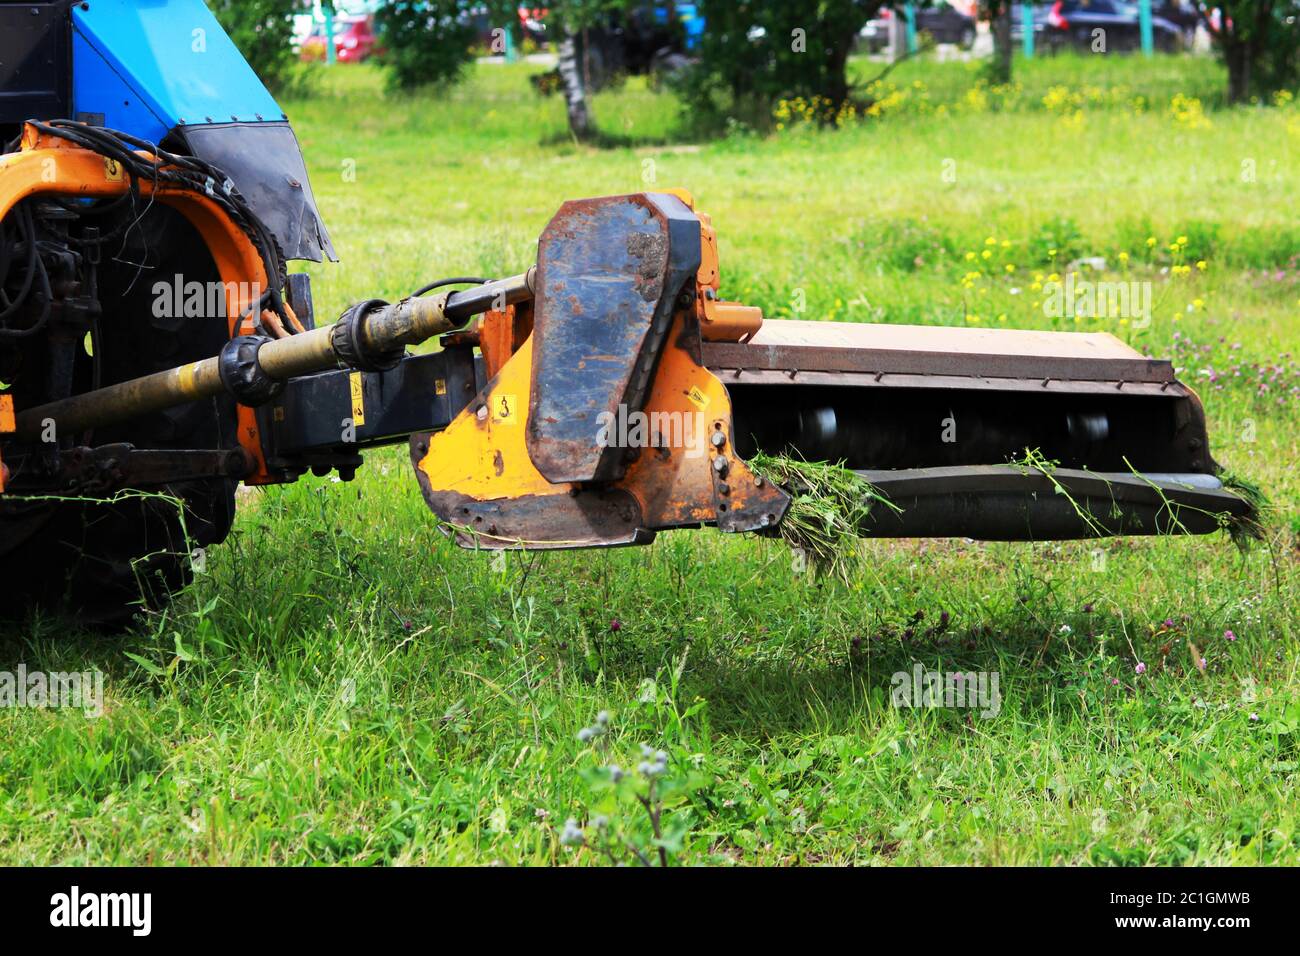 nozzle on a tractor that mows grass on urban lawns. Stock Photo